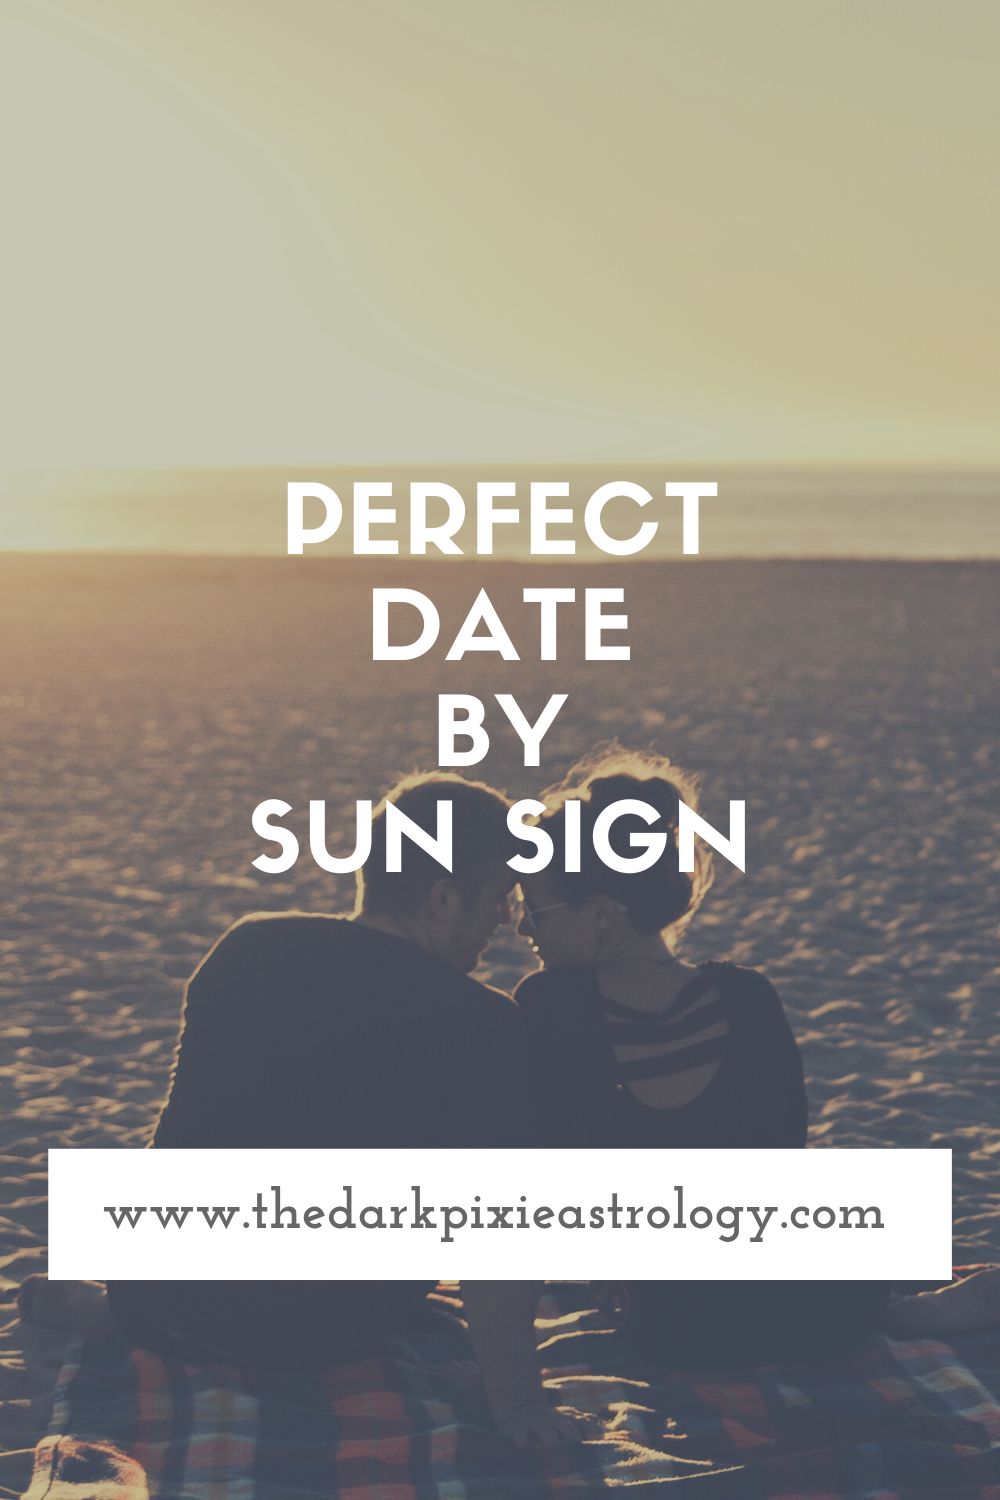 Perfect Date by Sun Sign - The Dark Pixie Astrology